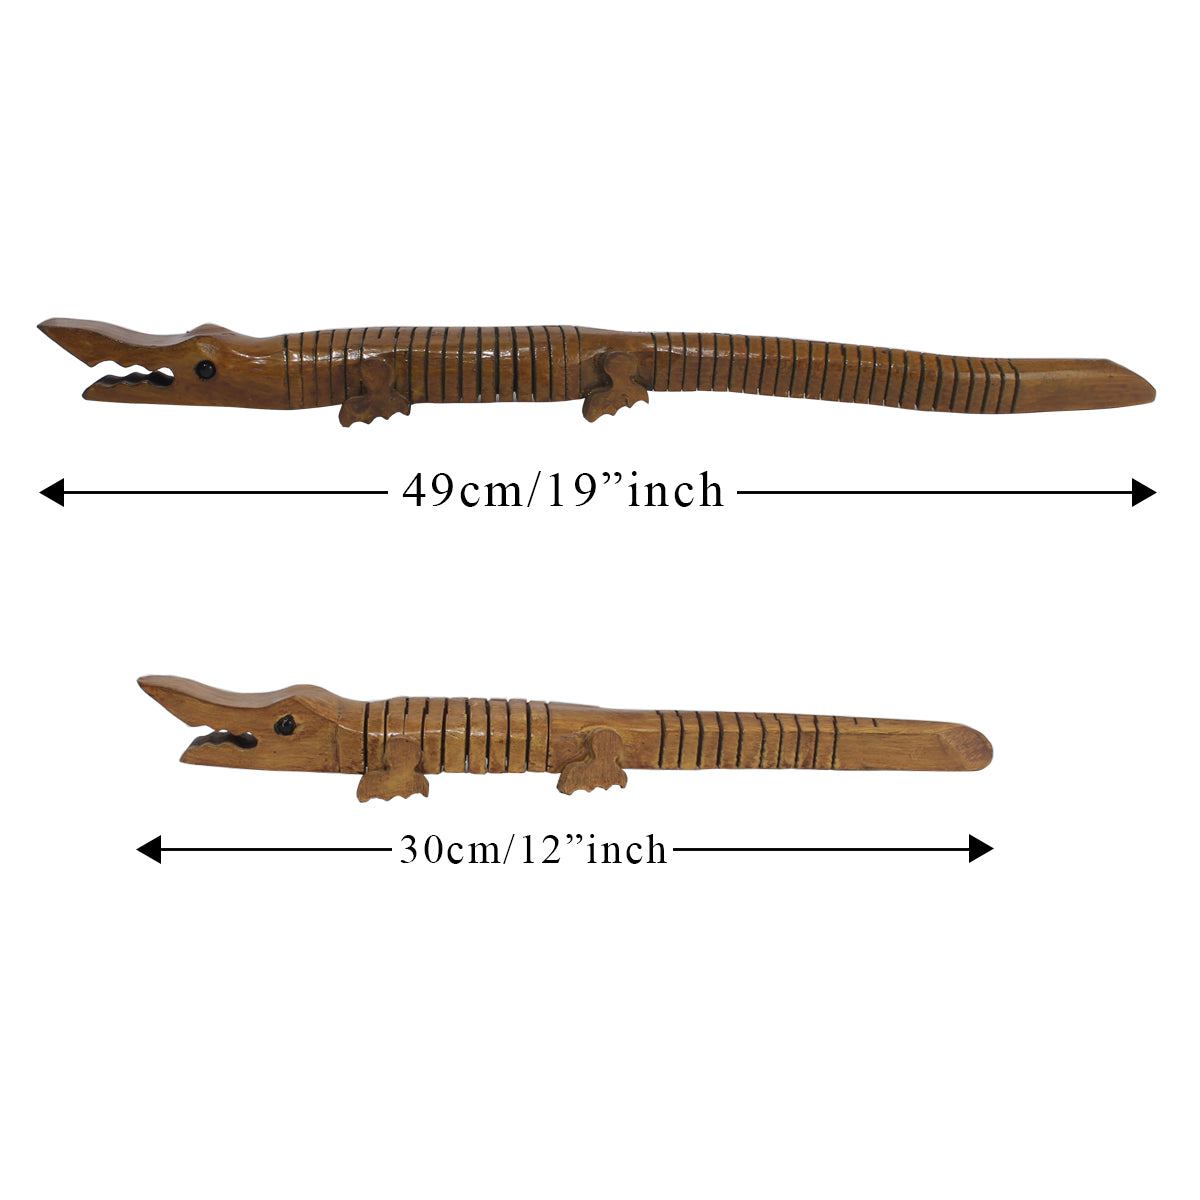 Wooden Crocodile Showpiece for Home Decor and Toy for Kids (Brown)